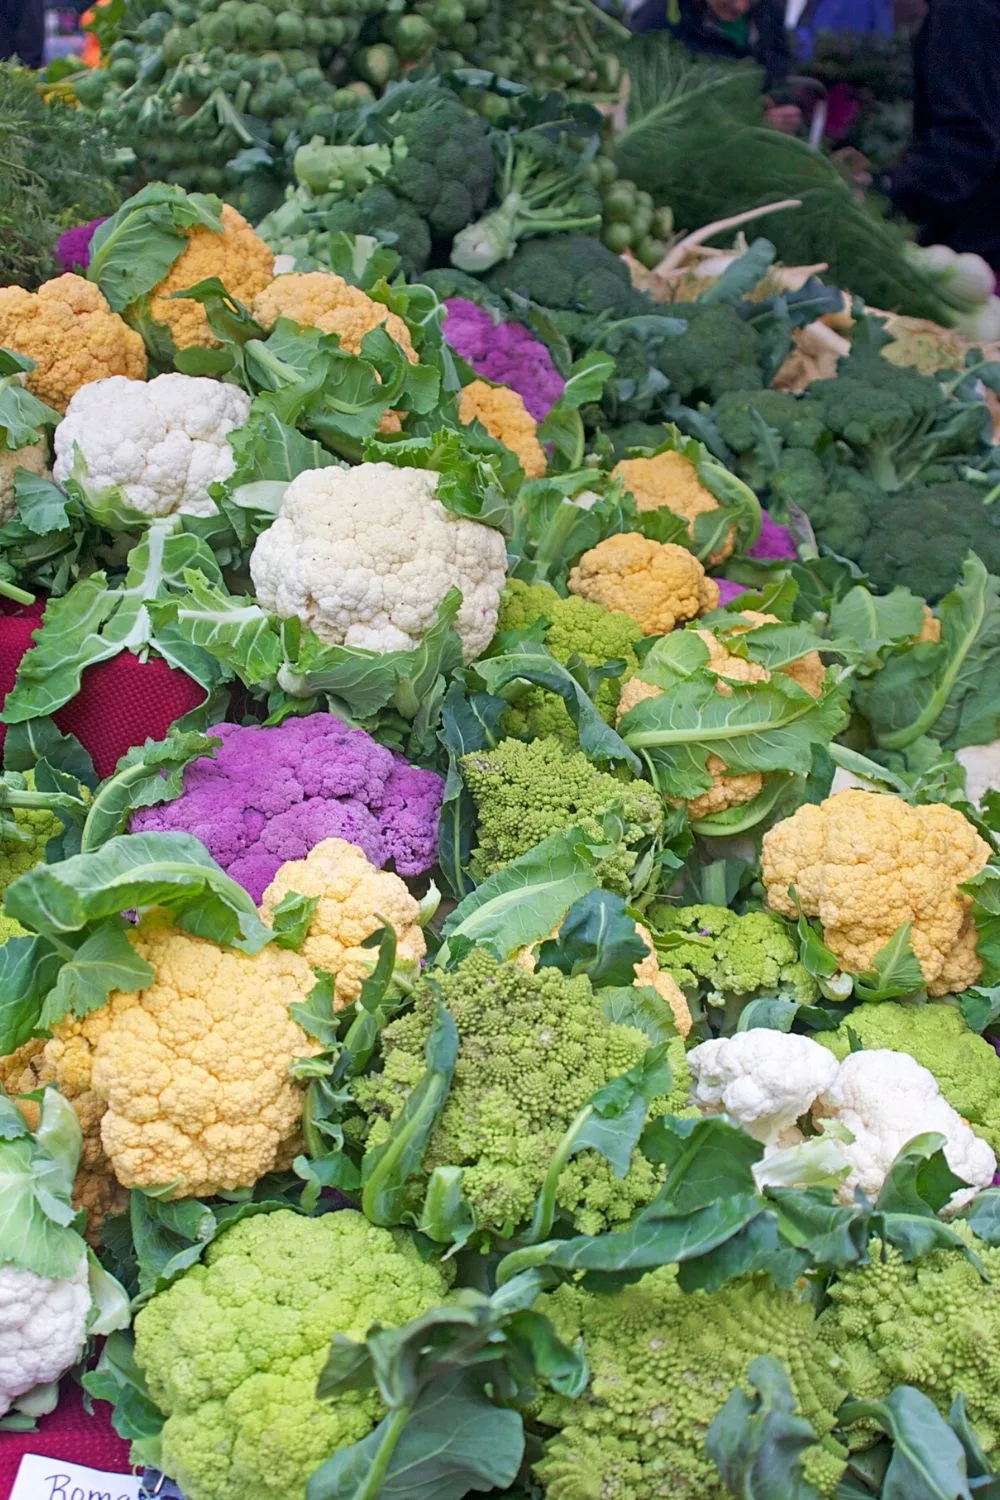 Though Cauliflower can thrive in raised beds, it grows slowly, making it an ideal plant for expert gardeners